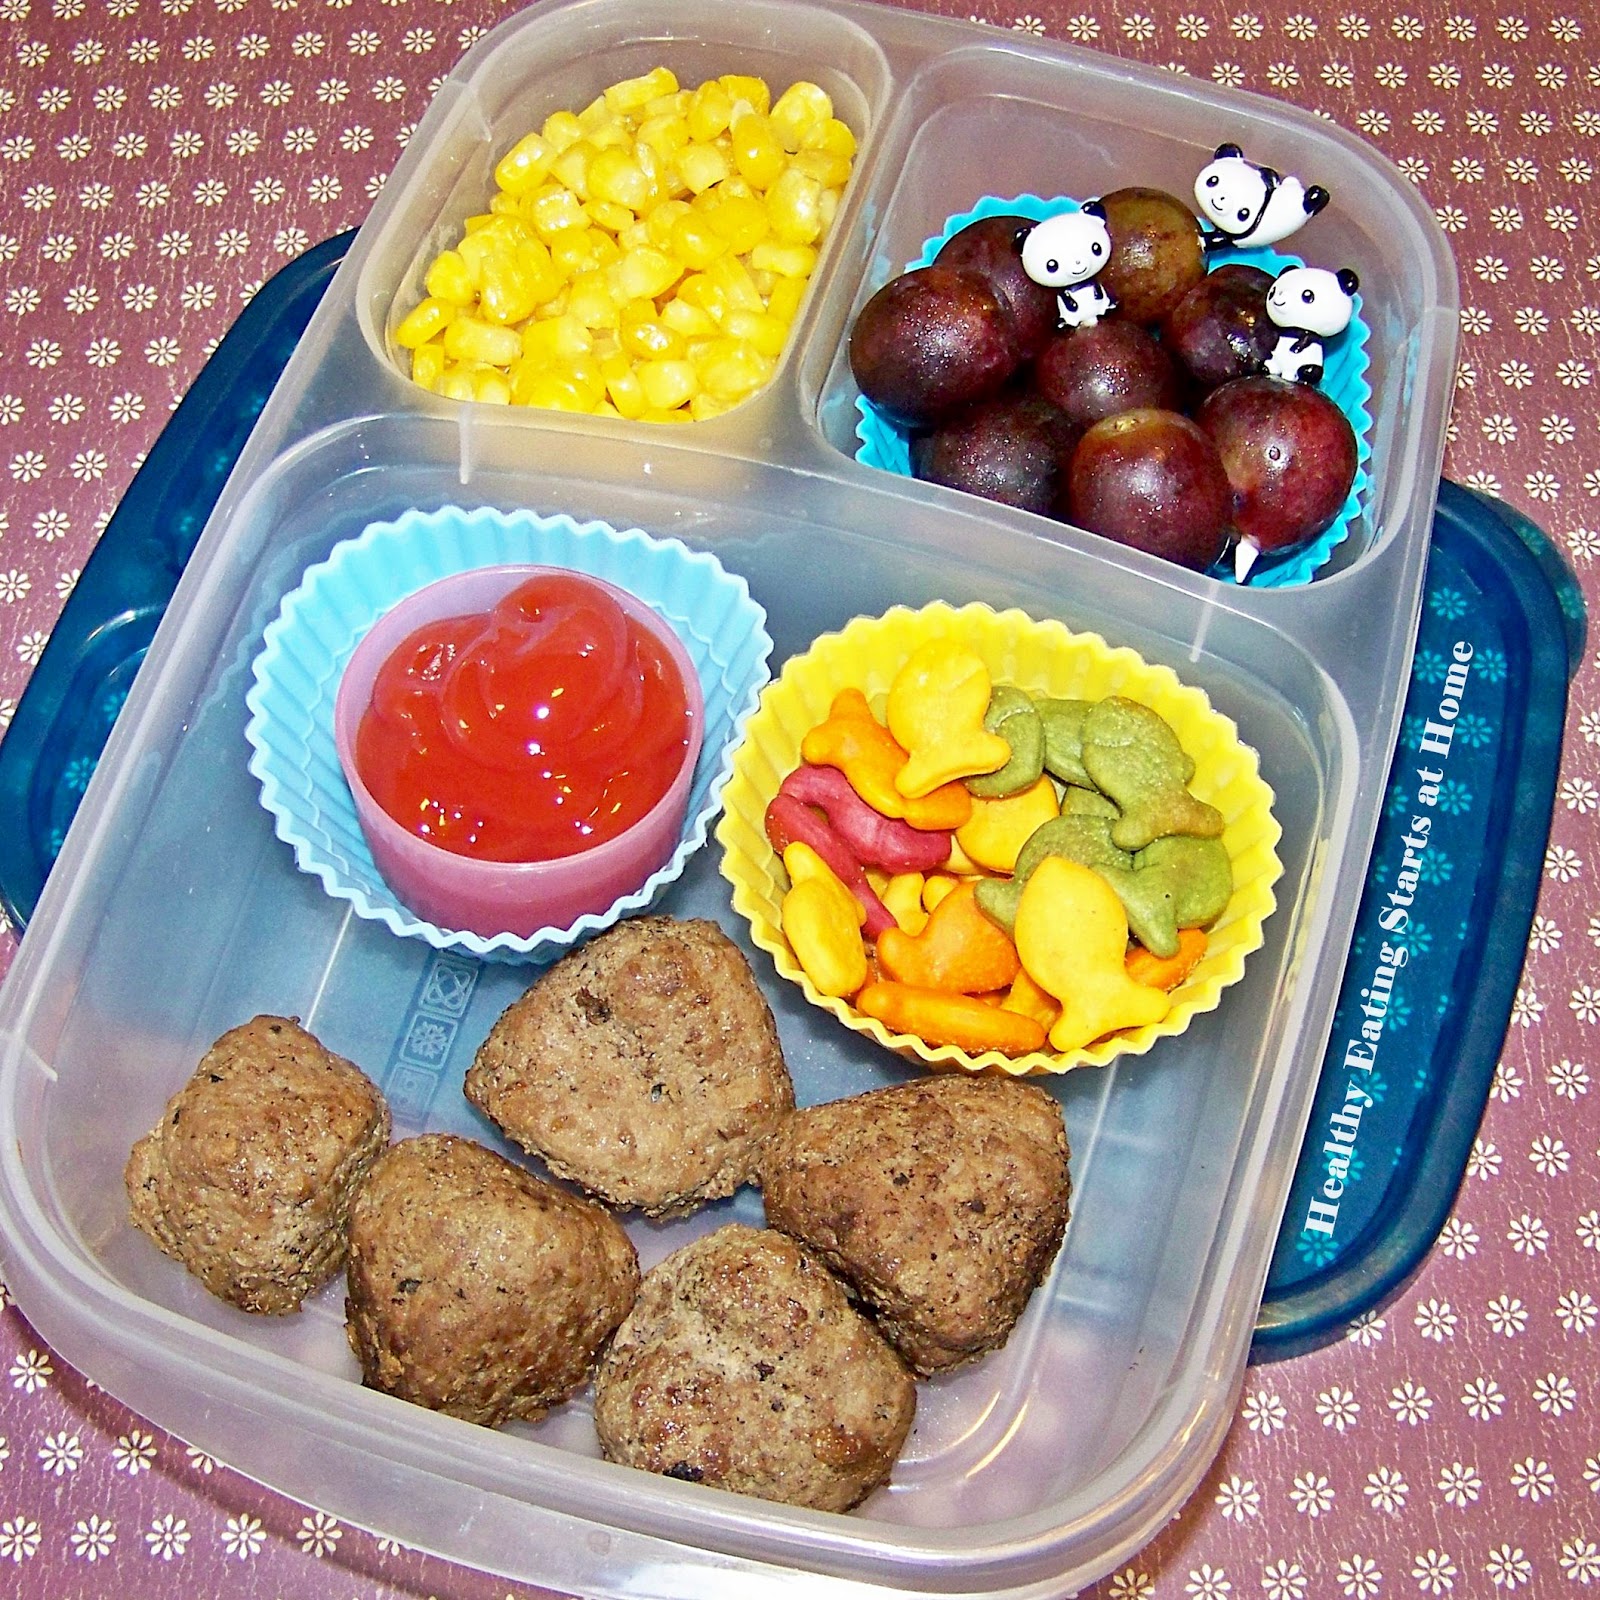     School Lunch Box Clipart  Playground Clipart  School Lunch Tray